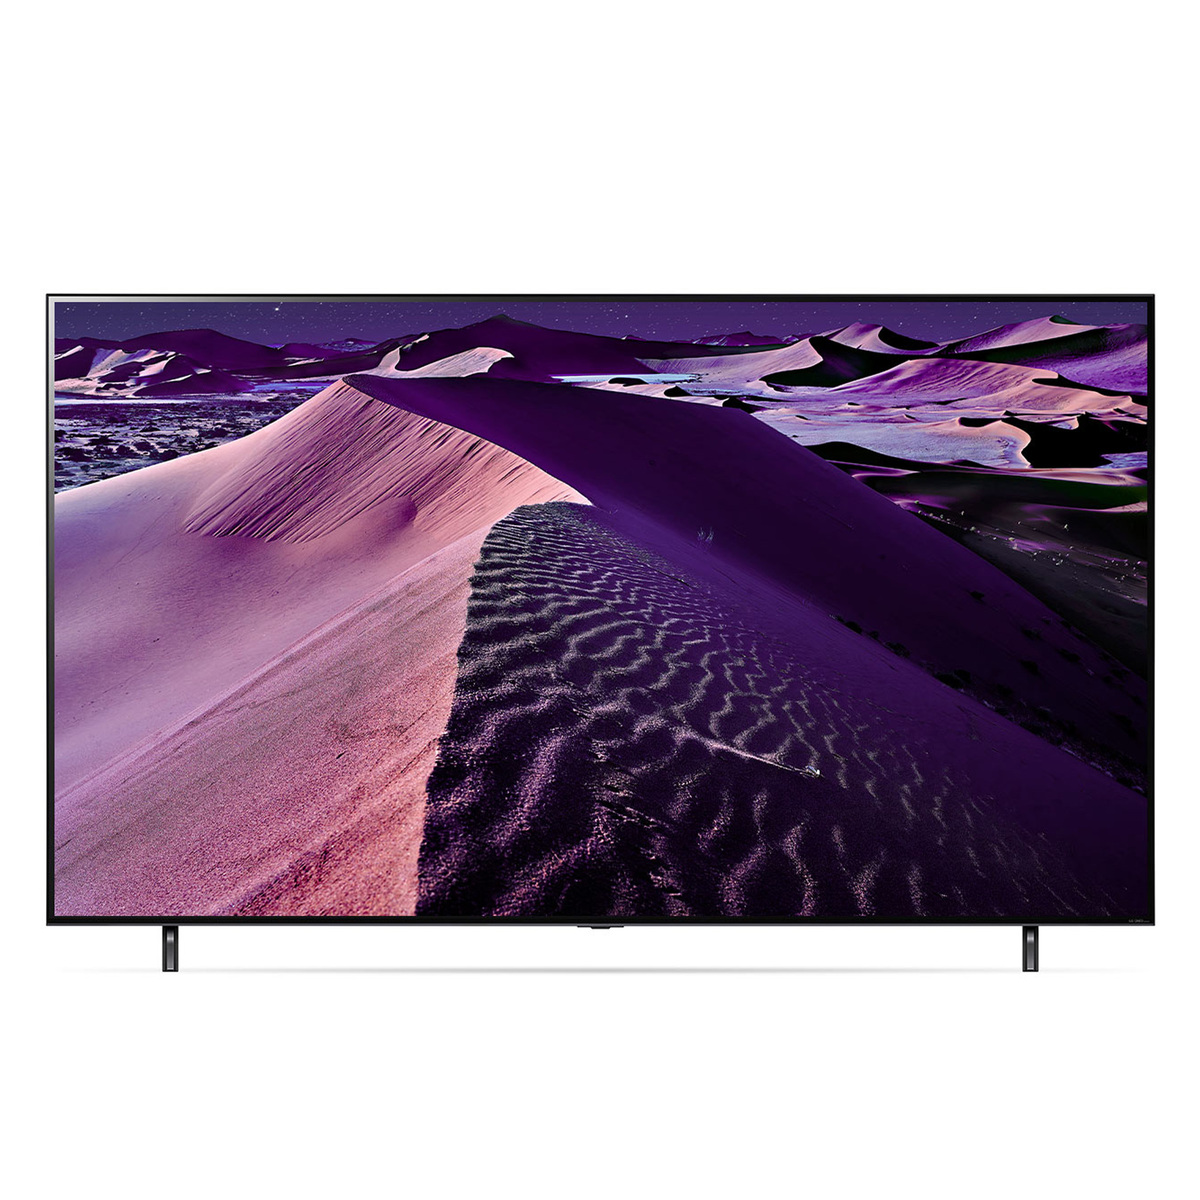 LG QNED TV 75 Inch QNED85 series, New 2022, Cinema Screen Design 4K Cinema HDR webOS22 with ThinQ AI Mini LED - 75QNED856QA